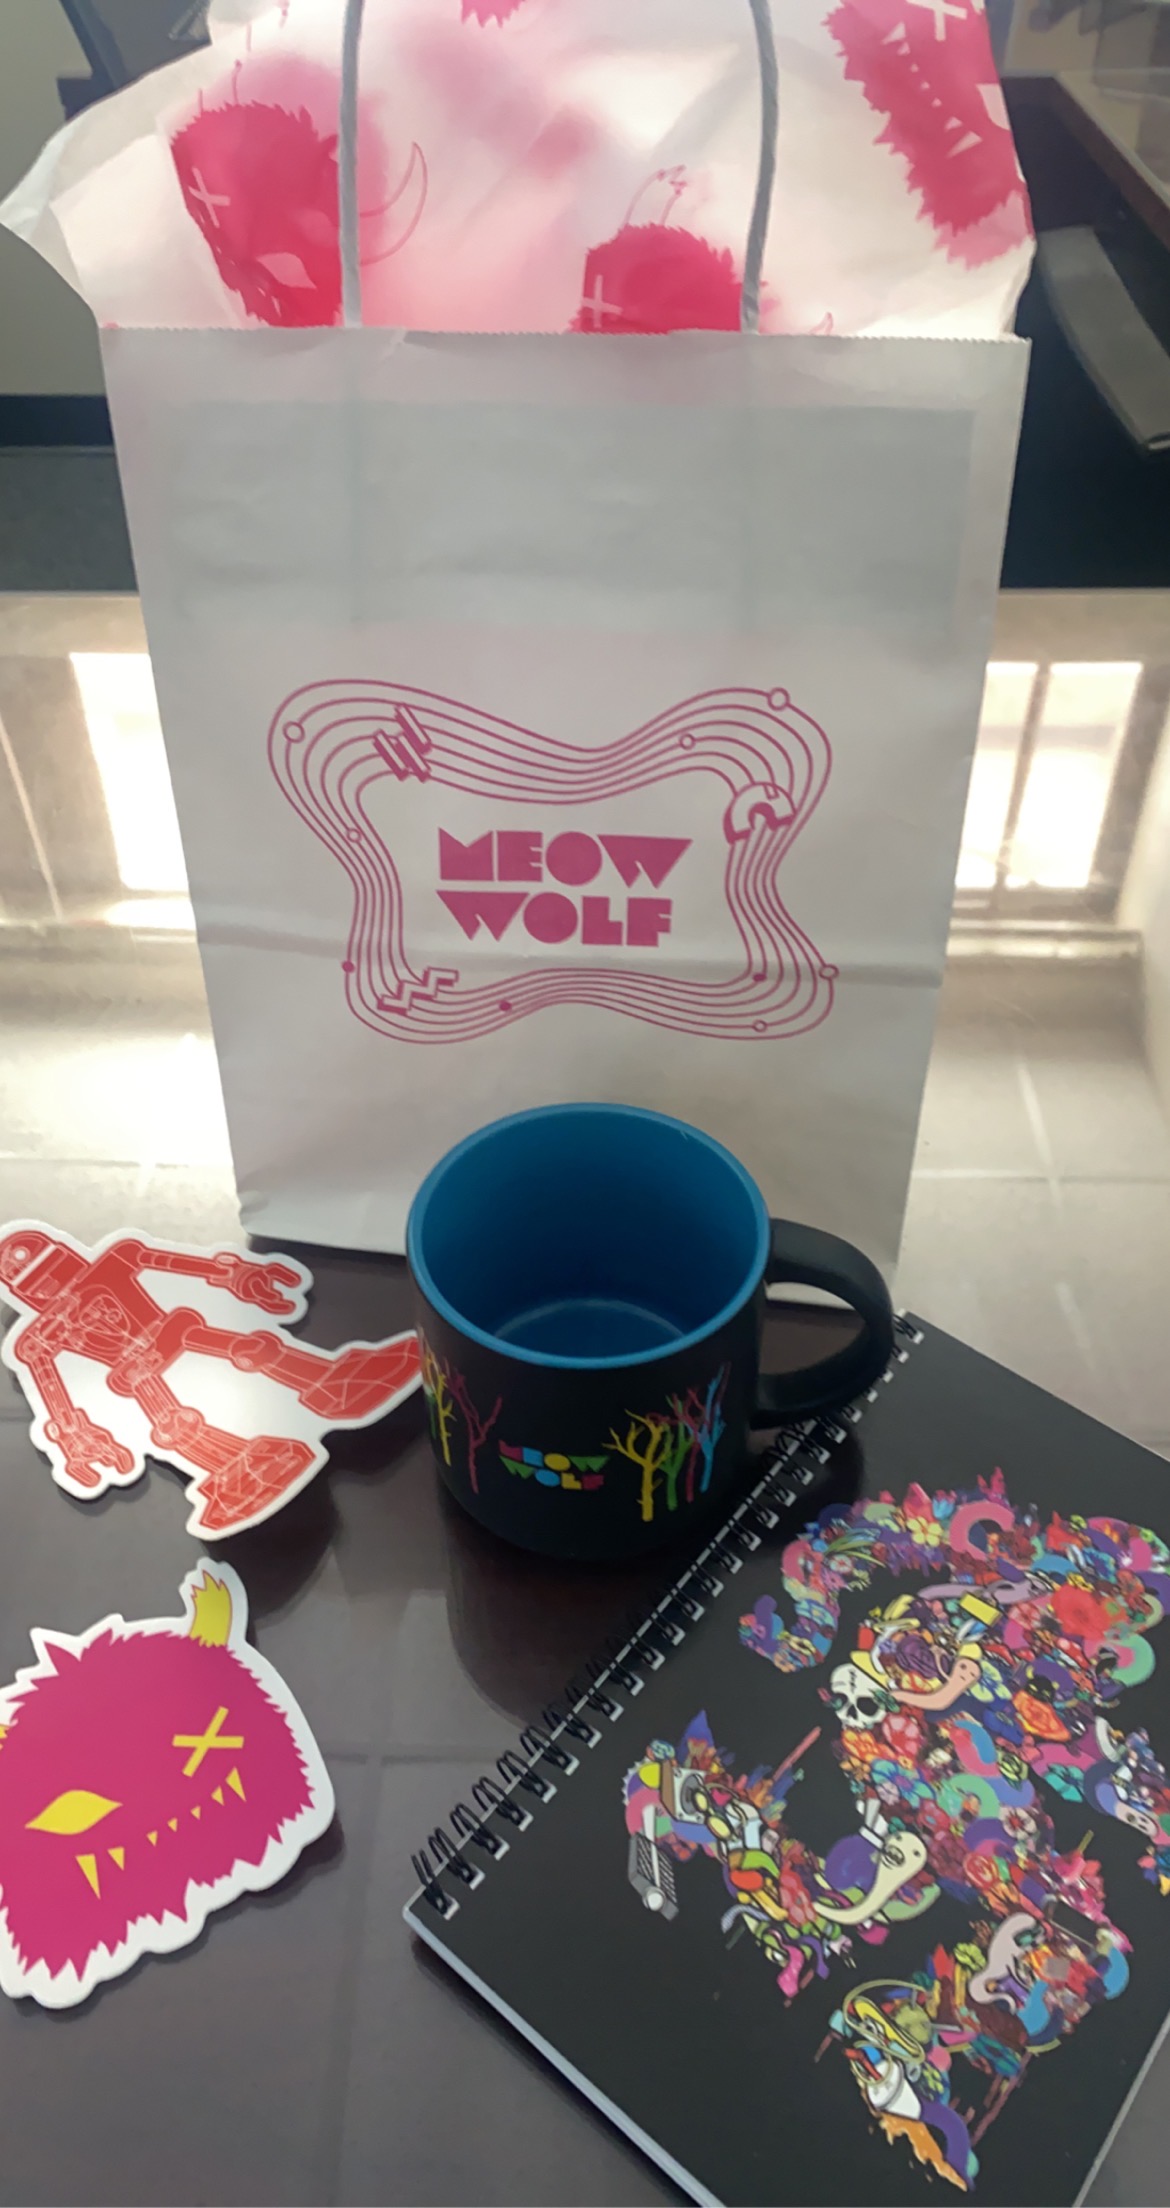 Meow Wold Swag Bag